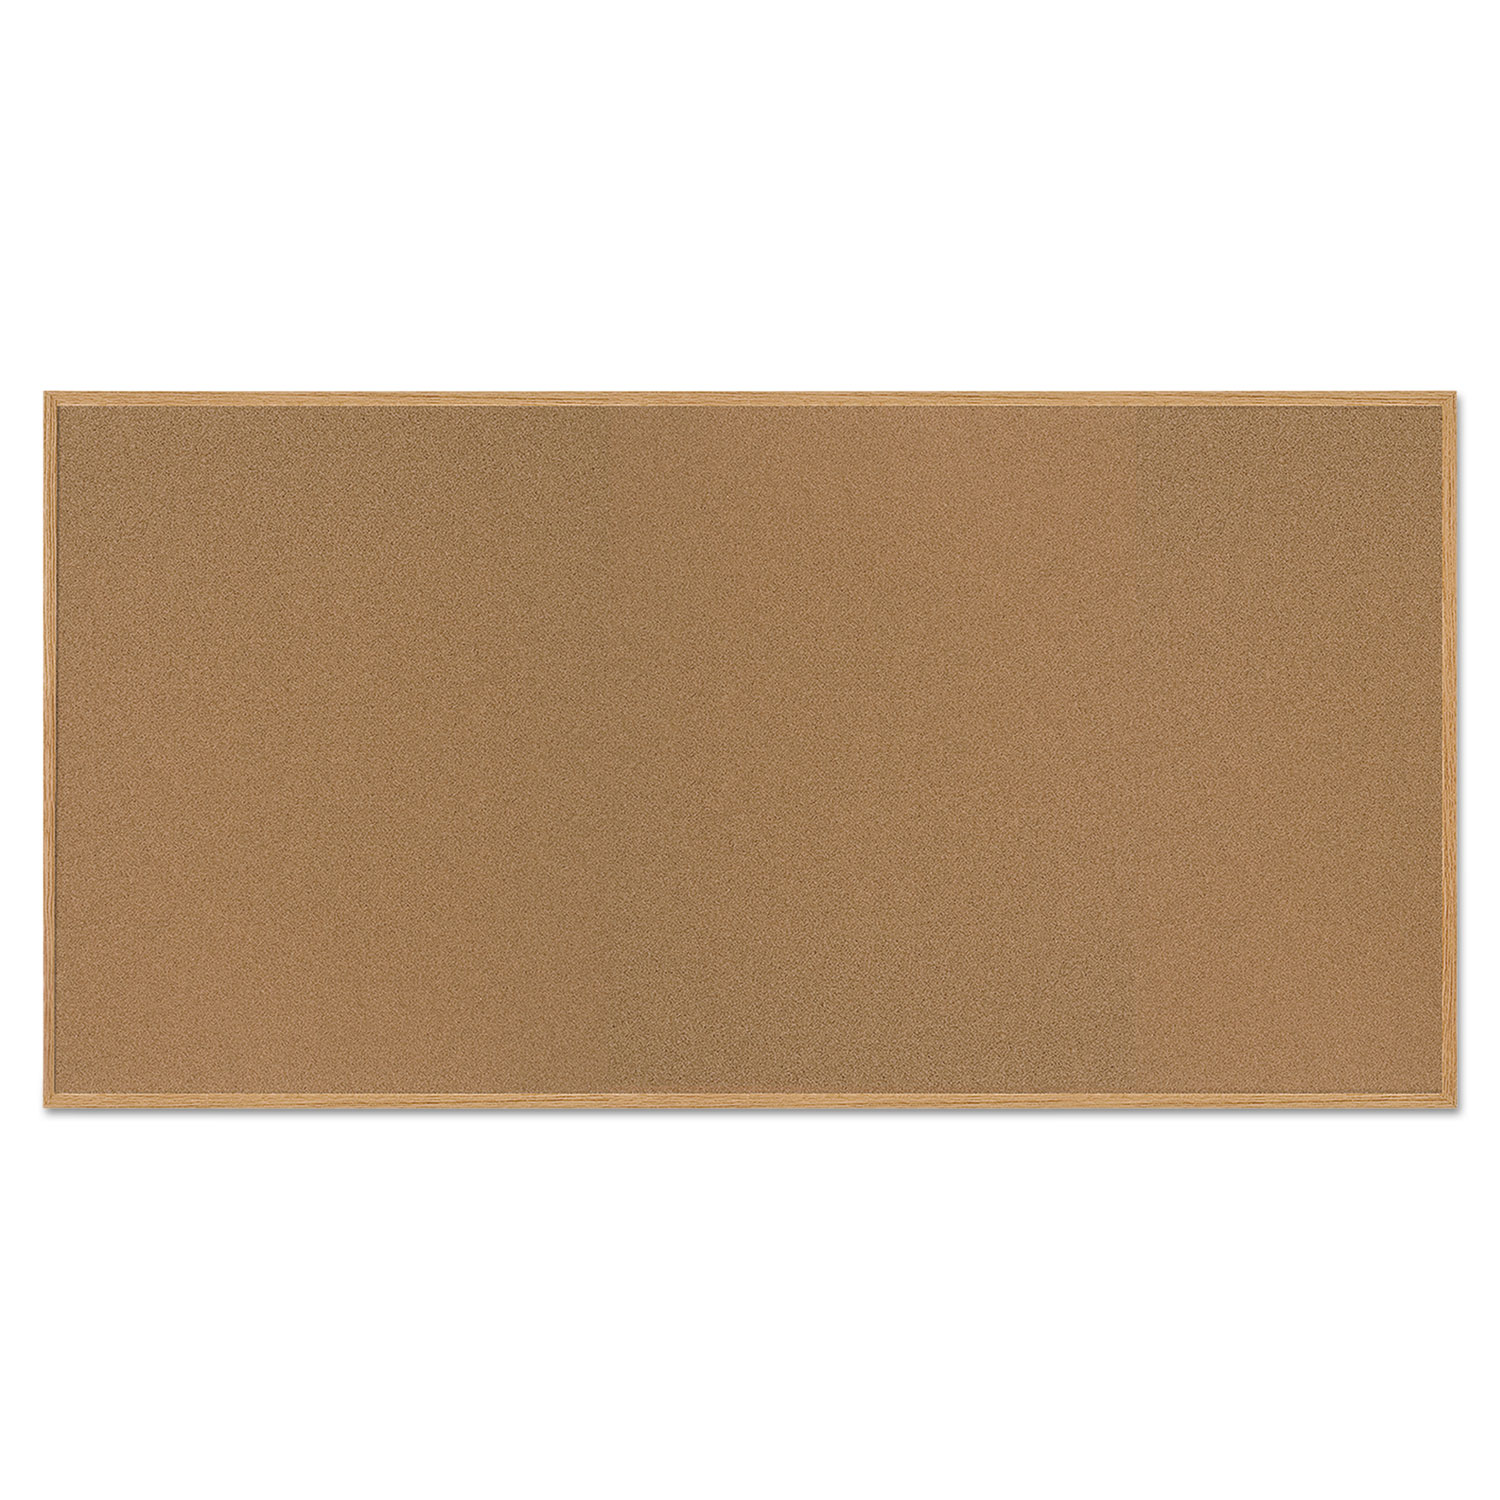  MasterVision SF362001233 Value Cork Bulletin Board with Oak Frame, 48 x 96, Natural (BVCSF362001233) 